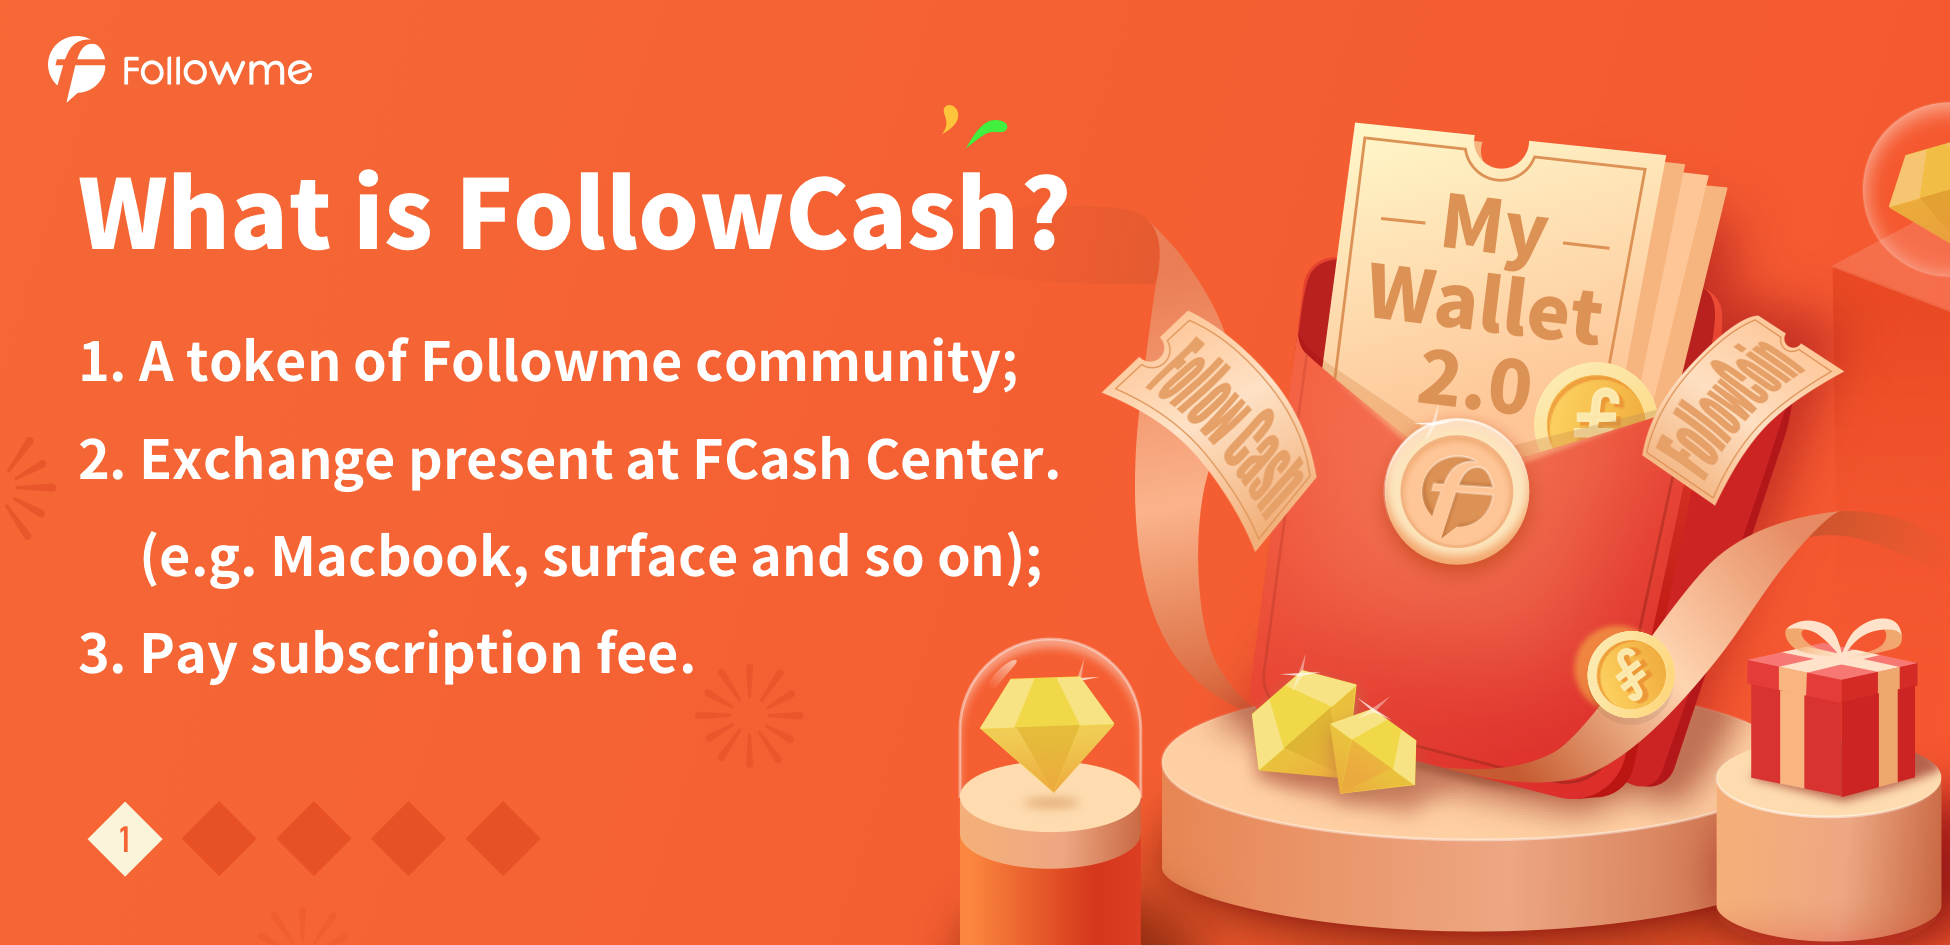 All for You—Find 5 Pictures, Get 20 FollowCash!